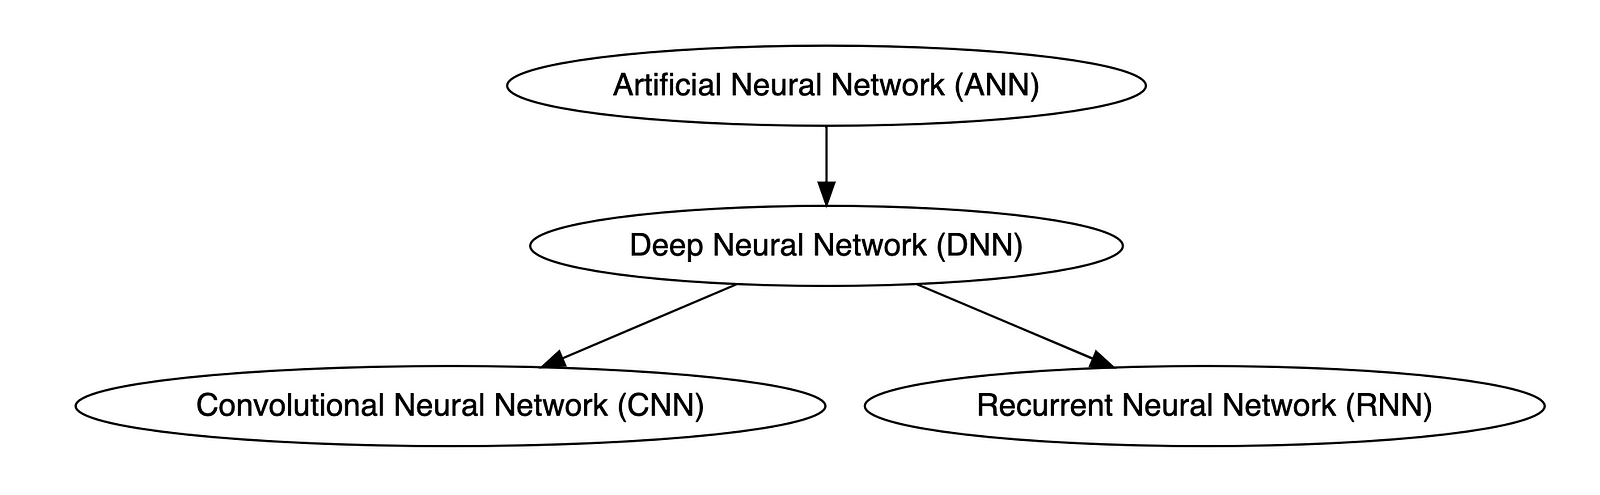 Relationship between types of neural networks (image by author)